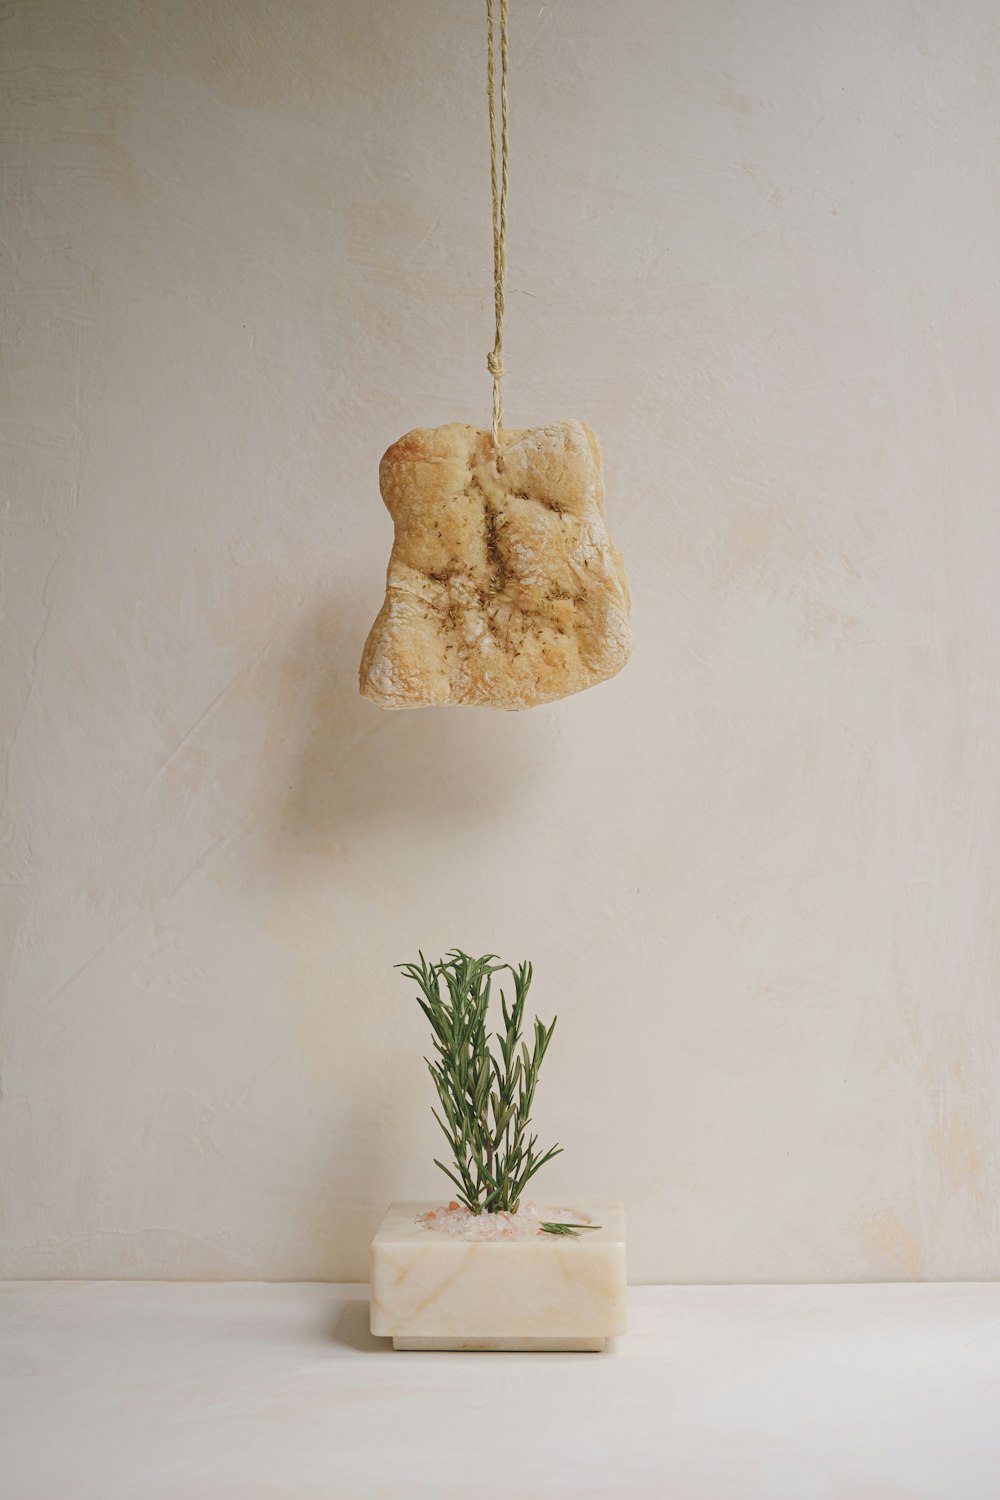 a piece of bread hanging from a rope next to a plant